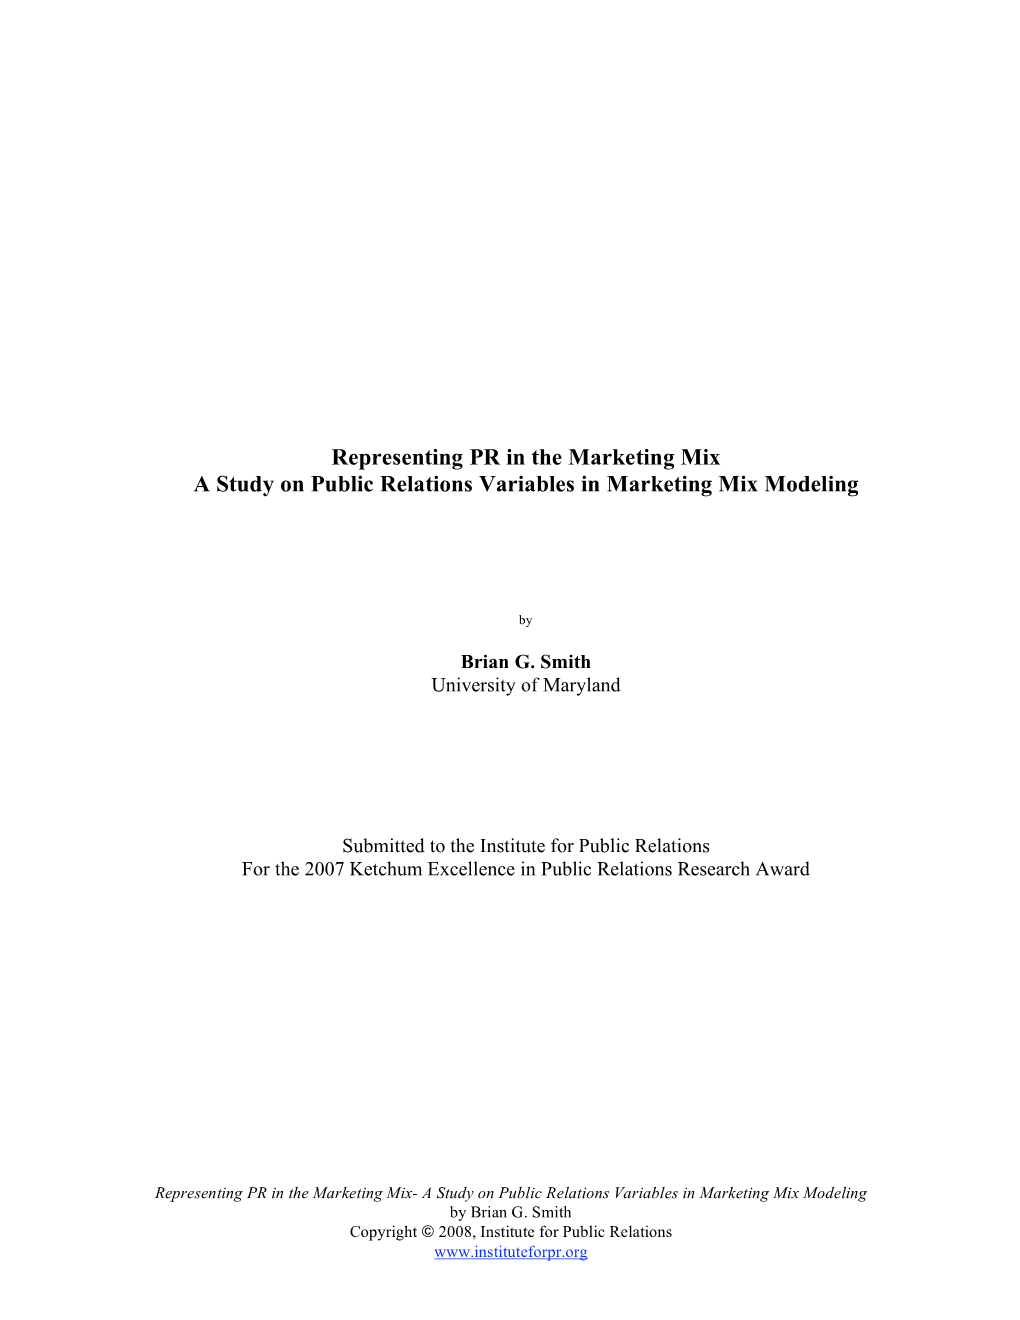 A Study on PR Variables in Marketing Mix Modeling